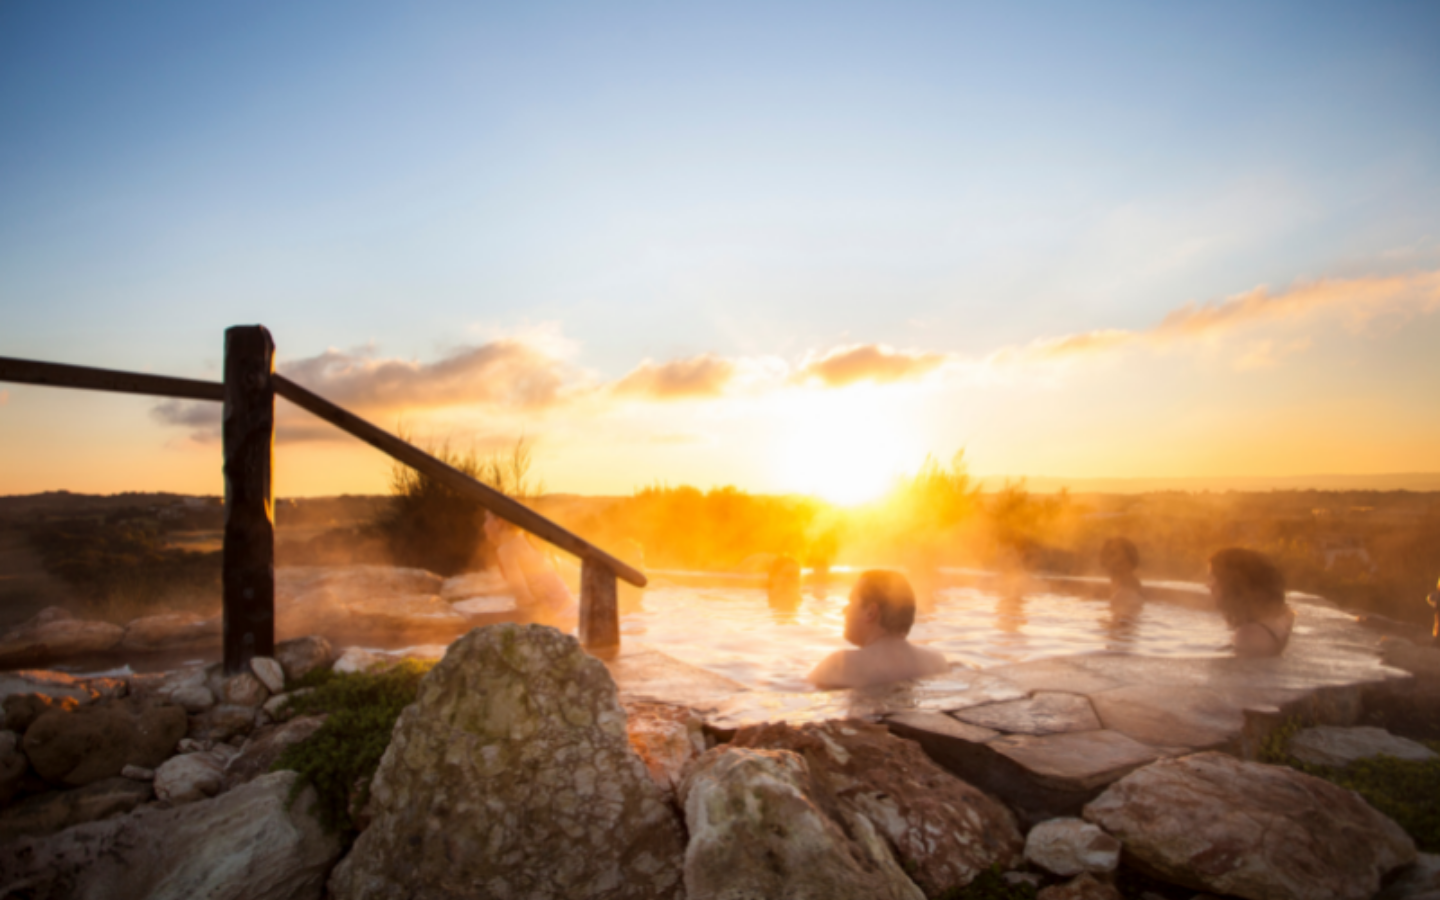 people sitting in steamy hilltop geothermal pool with sun rising